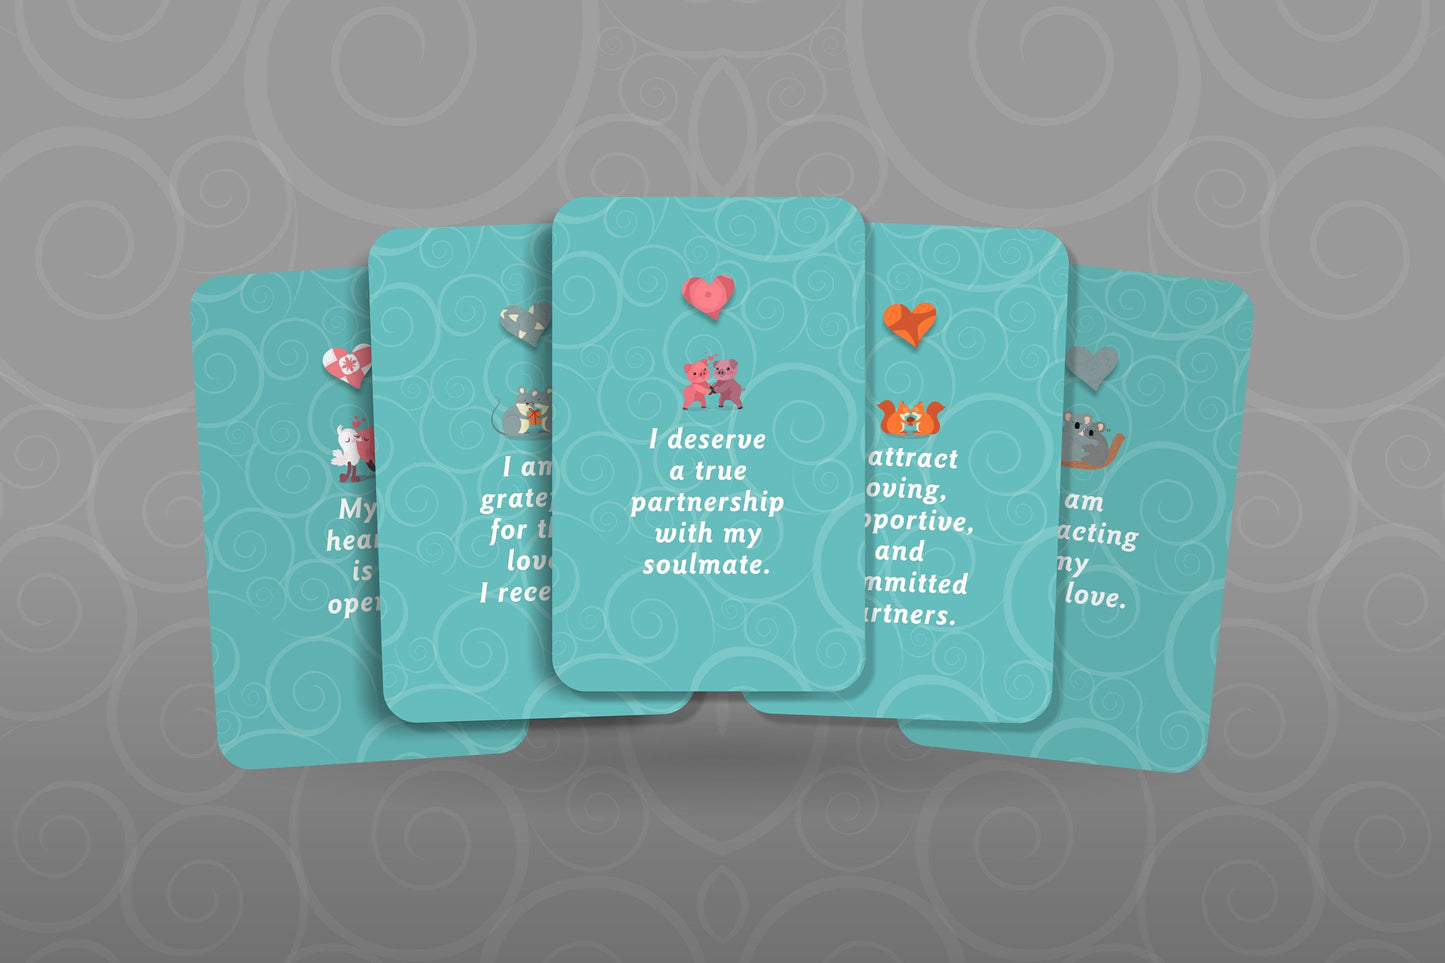 Manifesting Love - Affirmation Cards To attract Love